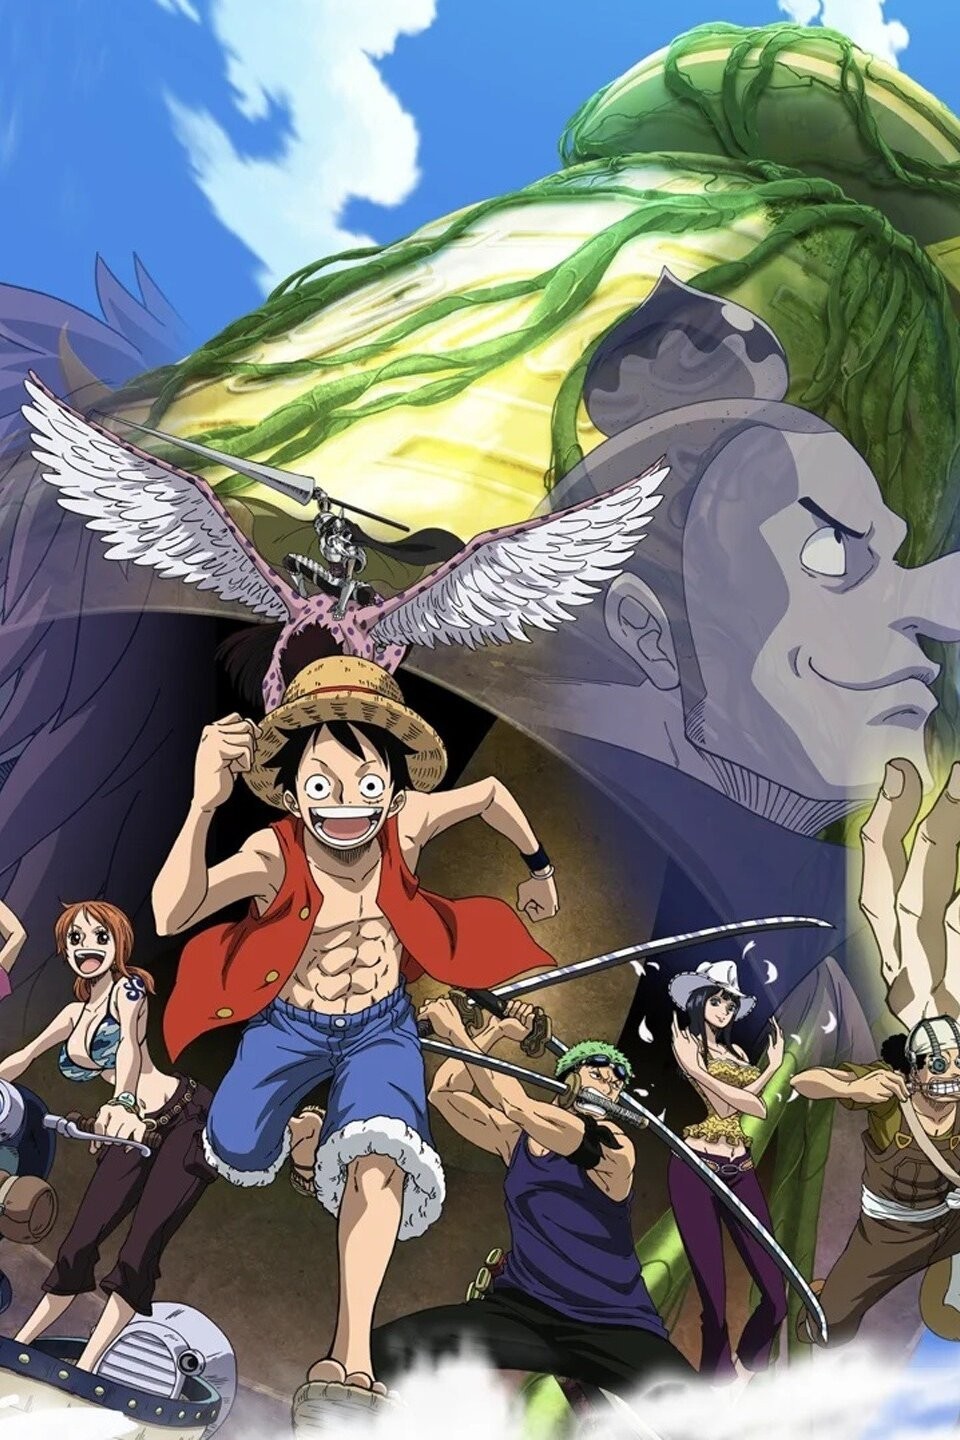 One Piece Special Edition (HD, Subtitled): Sky Island (136-206) The Two  Awaken! On the Front Lines of the Burning Love Rescue! - Watch on  Crunchyroll